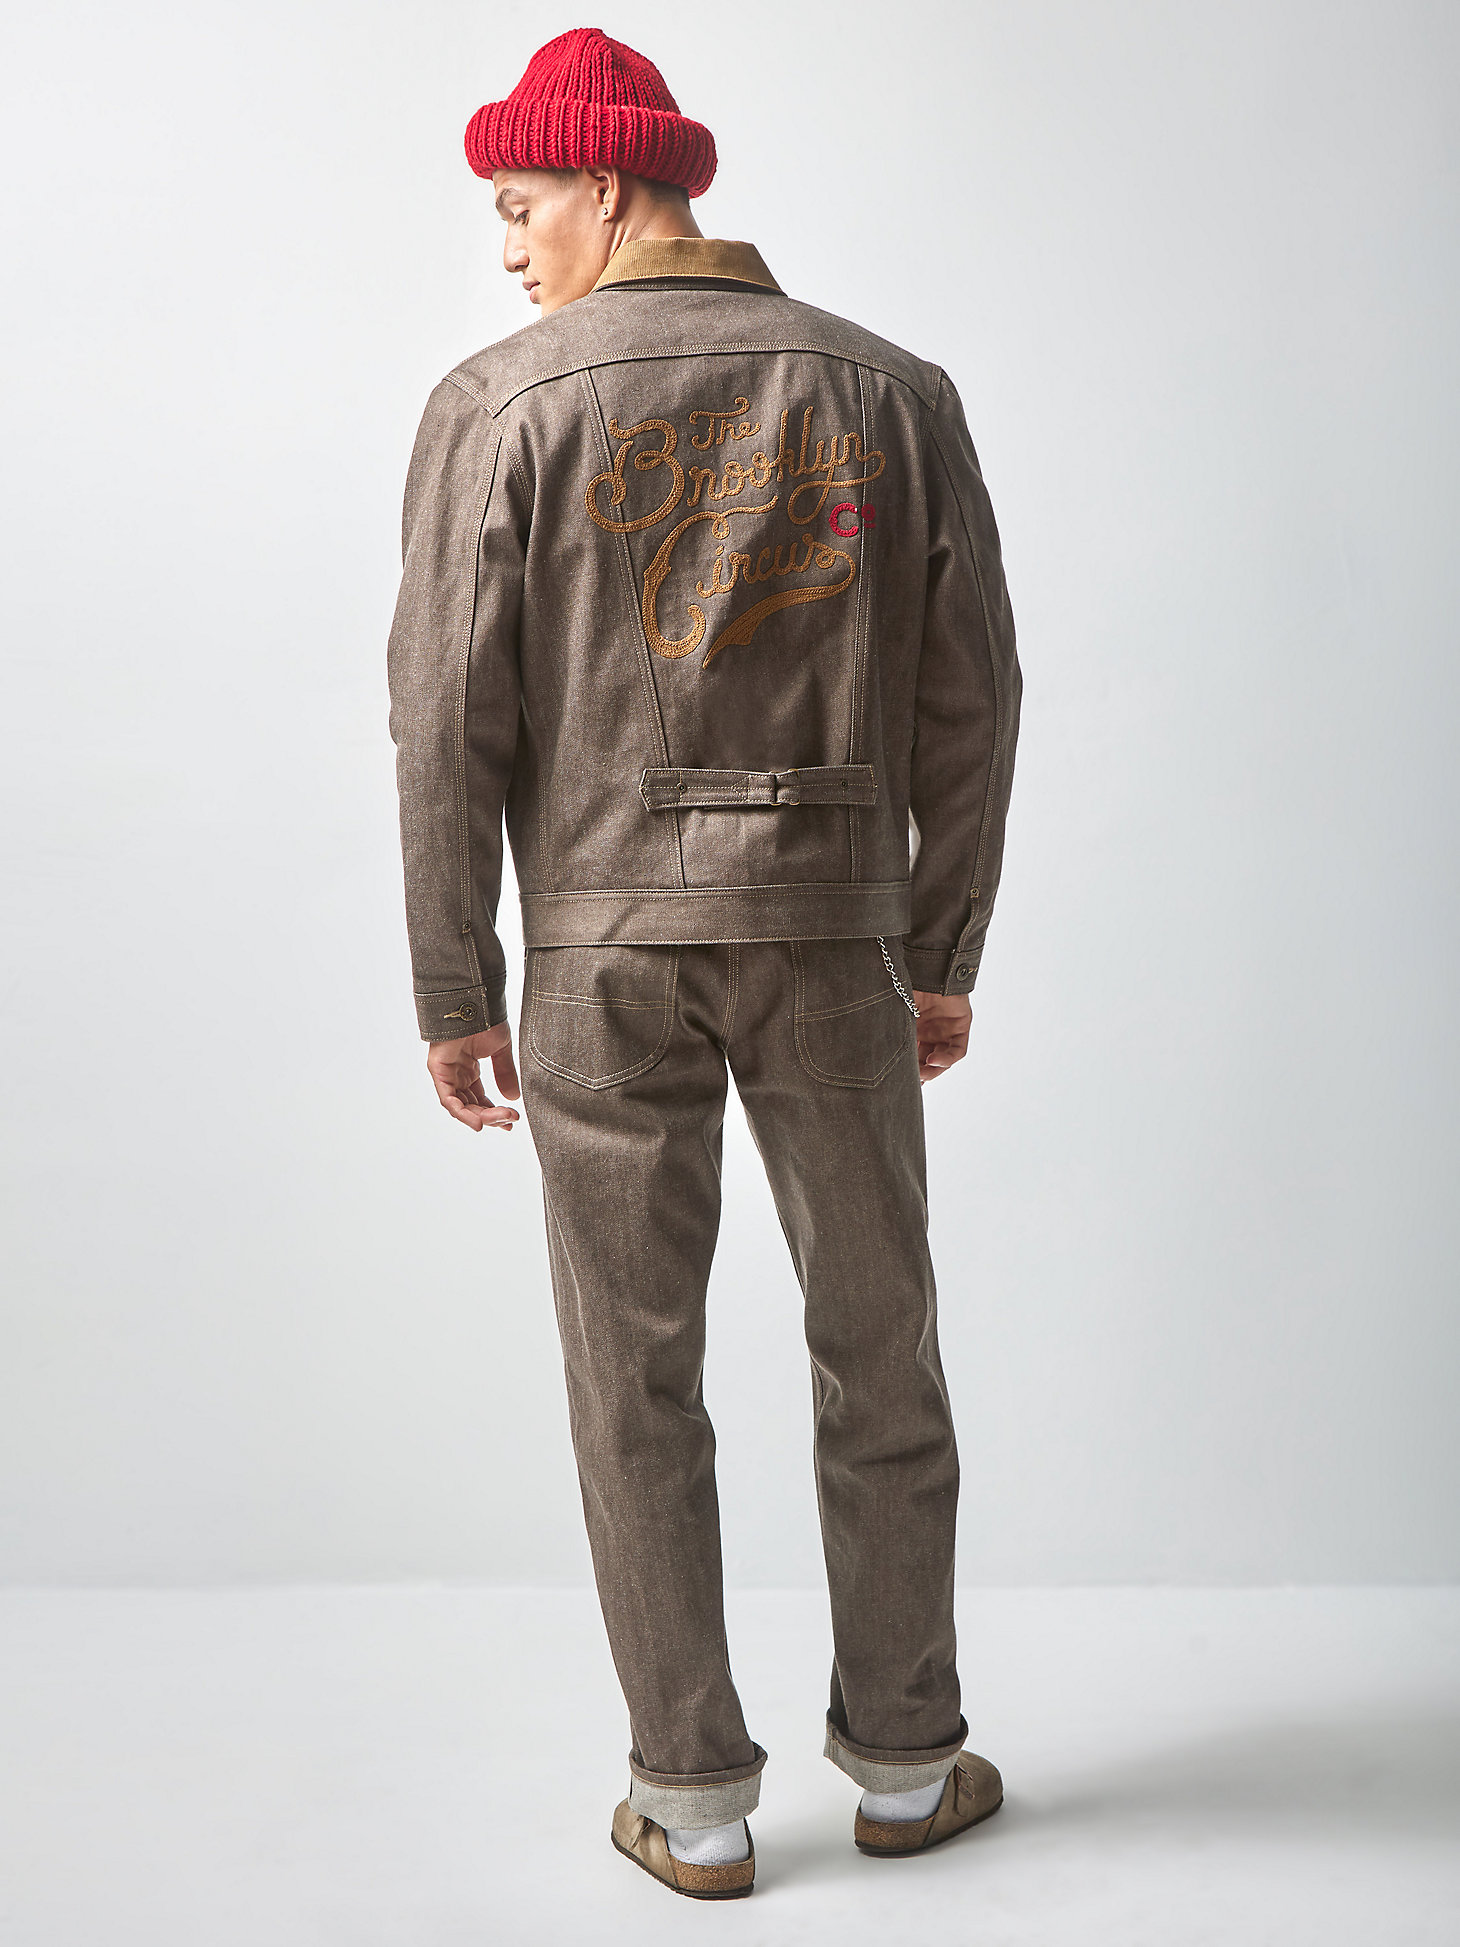 Men's Lee® x The Brooklyn Circus® 1930's Cowboy Jacket in Brown Selvedge alternative view 7